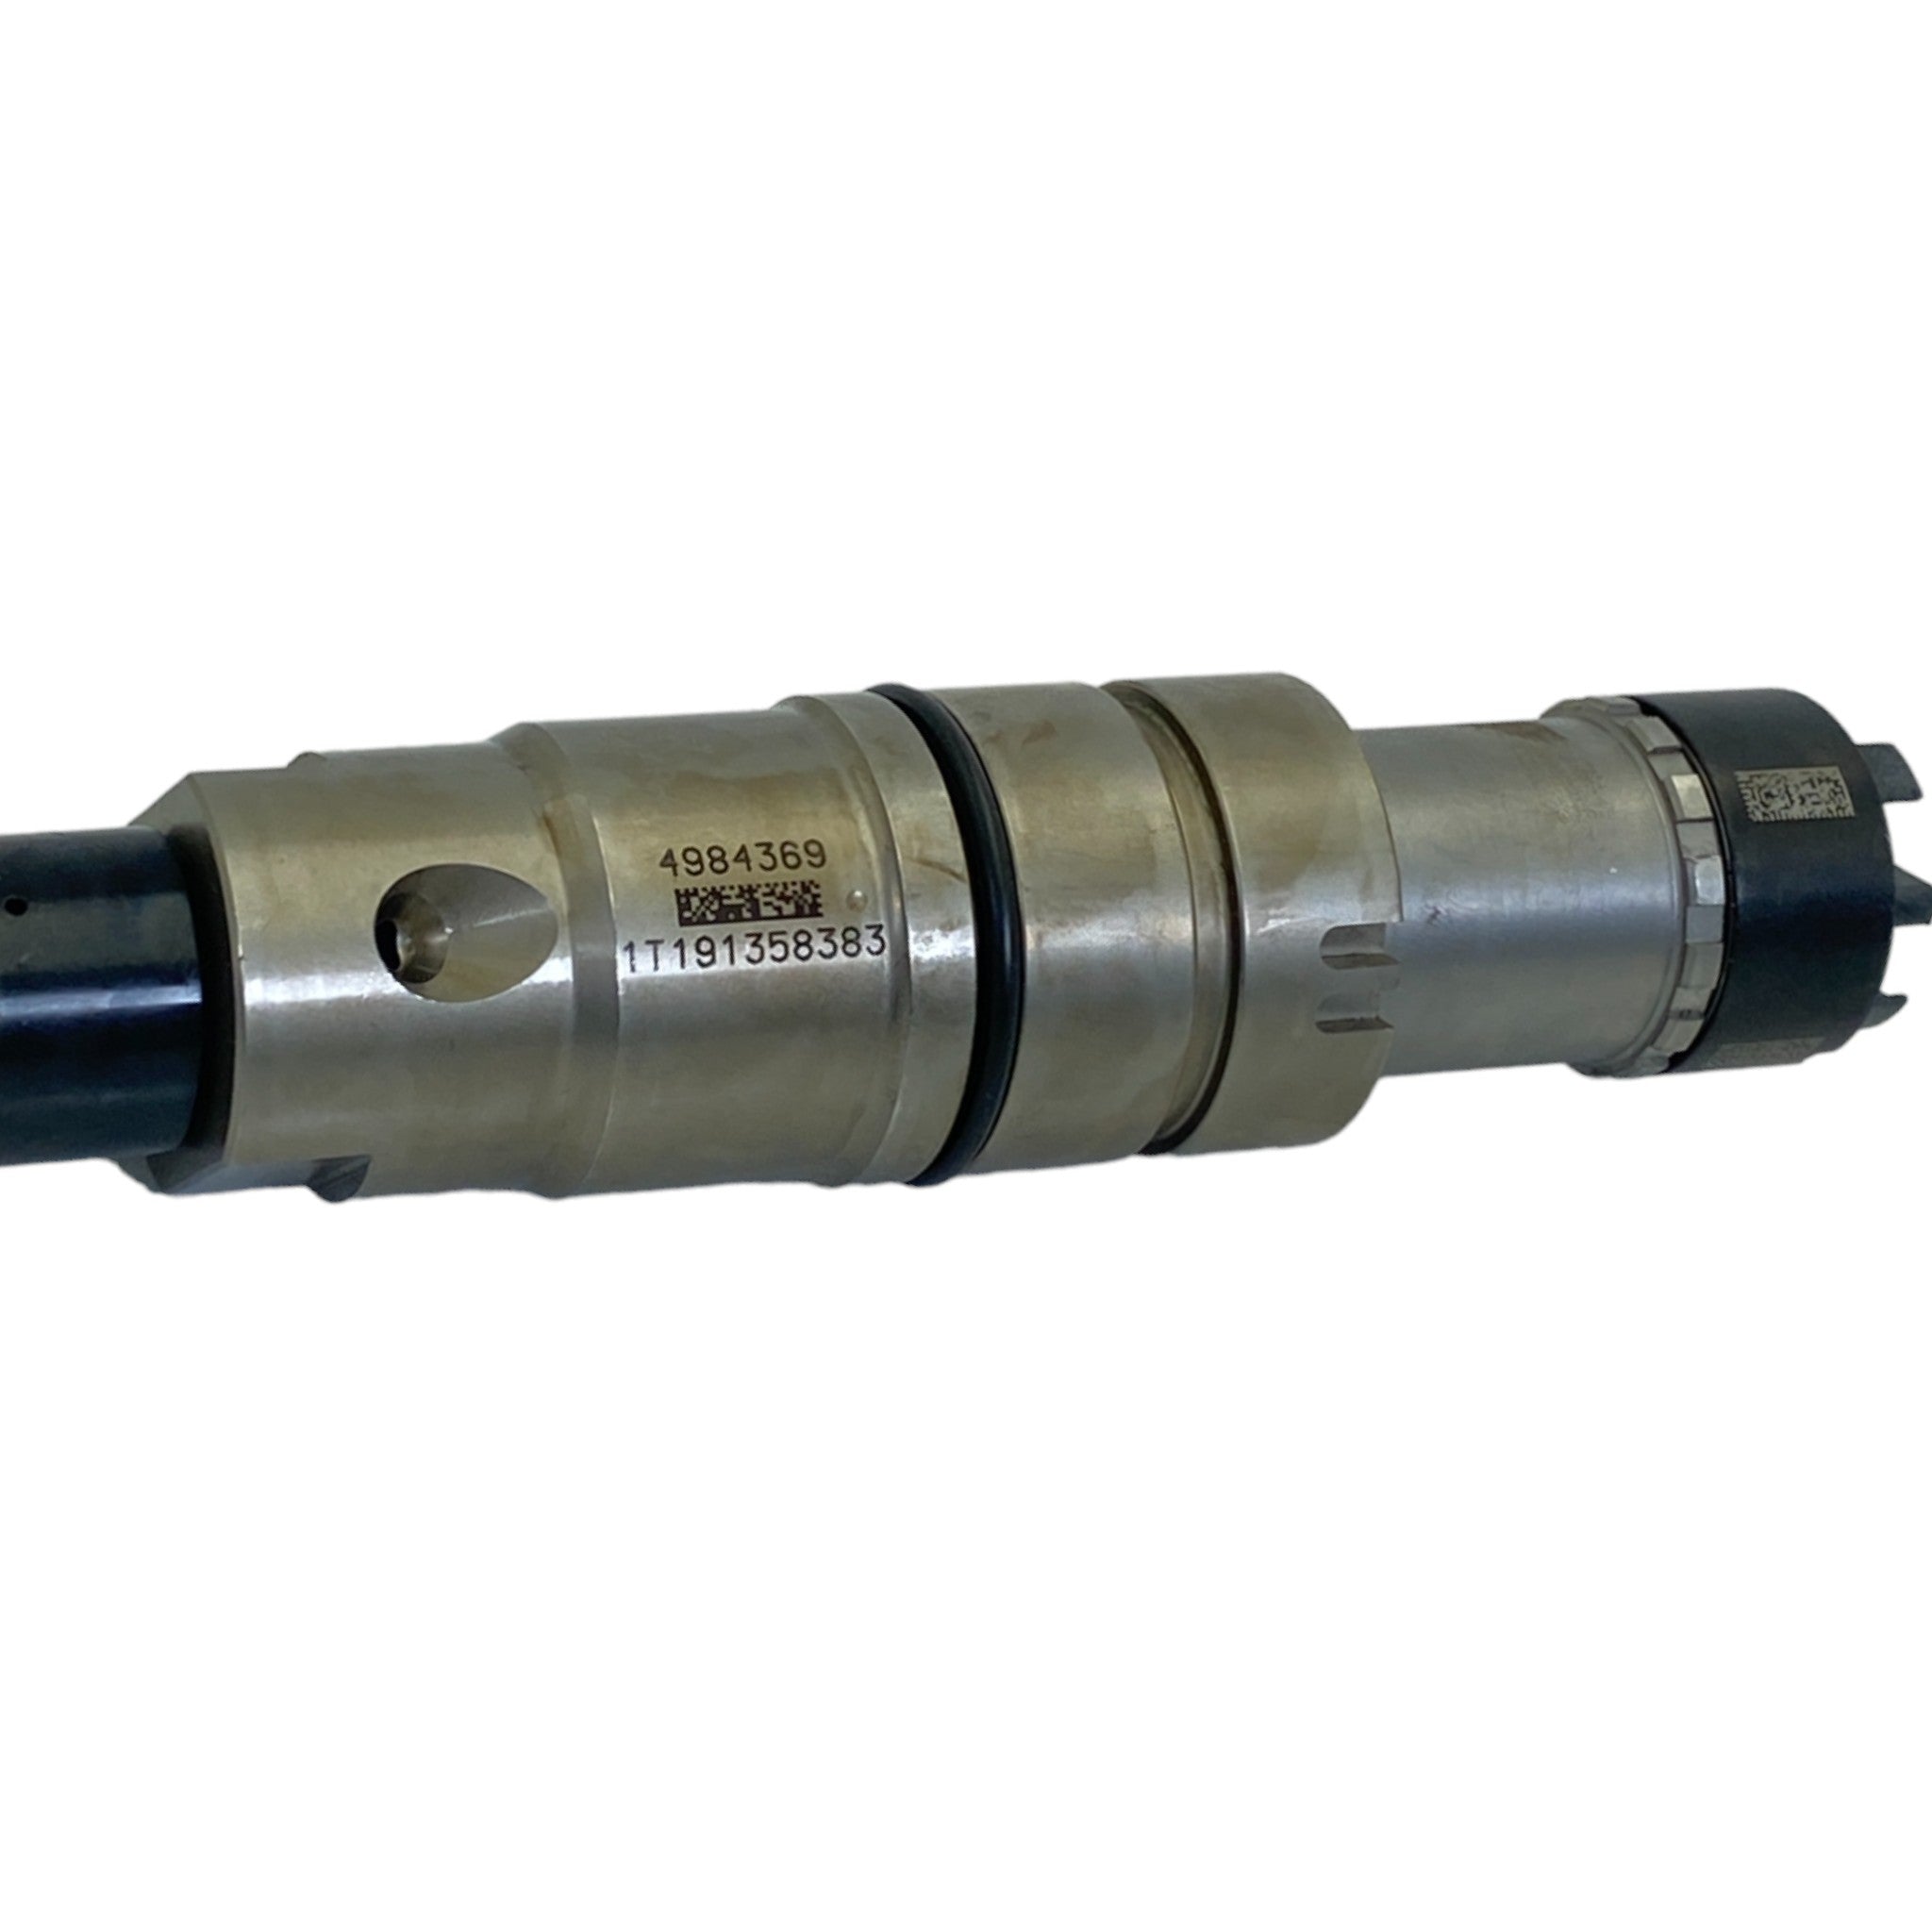 2897320Px Oem Cummins Fuel Injector For Xpi Fuel Systems On Epa13 15L Isx/Qsx Engines